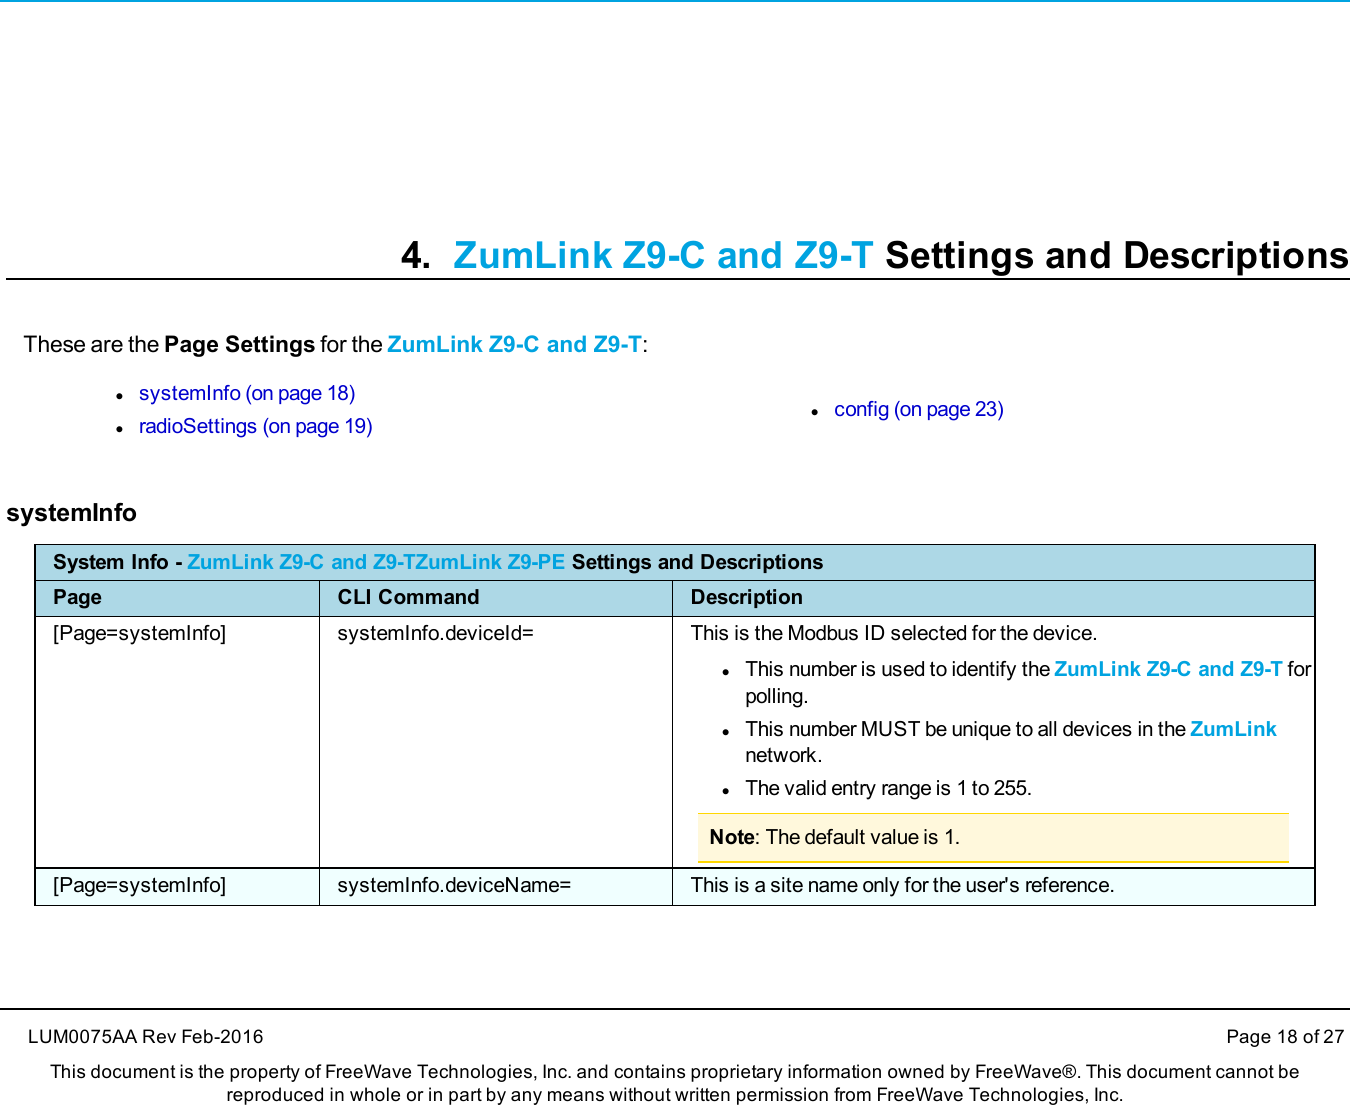 4. ZumLink Z9-C and Z9-T Settings and DescriptionsThese are the Page Settings for the ZumLink Z9-C and Z9-T:lsystemInfo (on page 18)lradioSettings (on page 19)lconfig (on page 23)systemInfoSystem Info - ZumLink Z9-C and Z9-TZumLink Z9-PE Settings and DescriptionsPage CLI Command Description[Page=systemInfo] systemInfo.deviceId= This is the Modbus ID selected for the device.lThis number is used to identify the ZumLink Z9-C and Z9-T forpolling.lThis number MUST be unique to all devices in the ZumLinknetwork.lThe valid entry range is 1 to 255.Note: The default value is 1.[Page=systemInfo] systemInfo.deviceName= This is a site name only for the user&apos;s reference.LUM0075AA Rev Feb-2016 Page 18 of 27This document is the property of FreeWave Technologies, Inc. and contains proprietary information owned by FreeWave®. This document cannot bereproduced in whole or in part by any means without written permission from FreeWave Technologies, Inc.